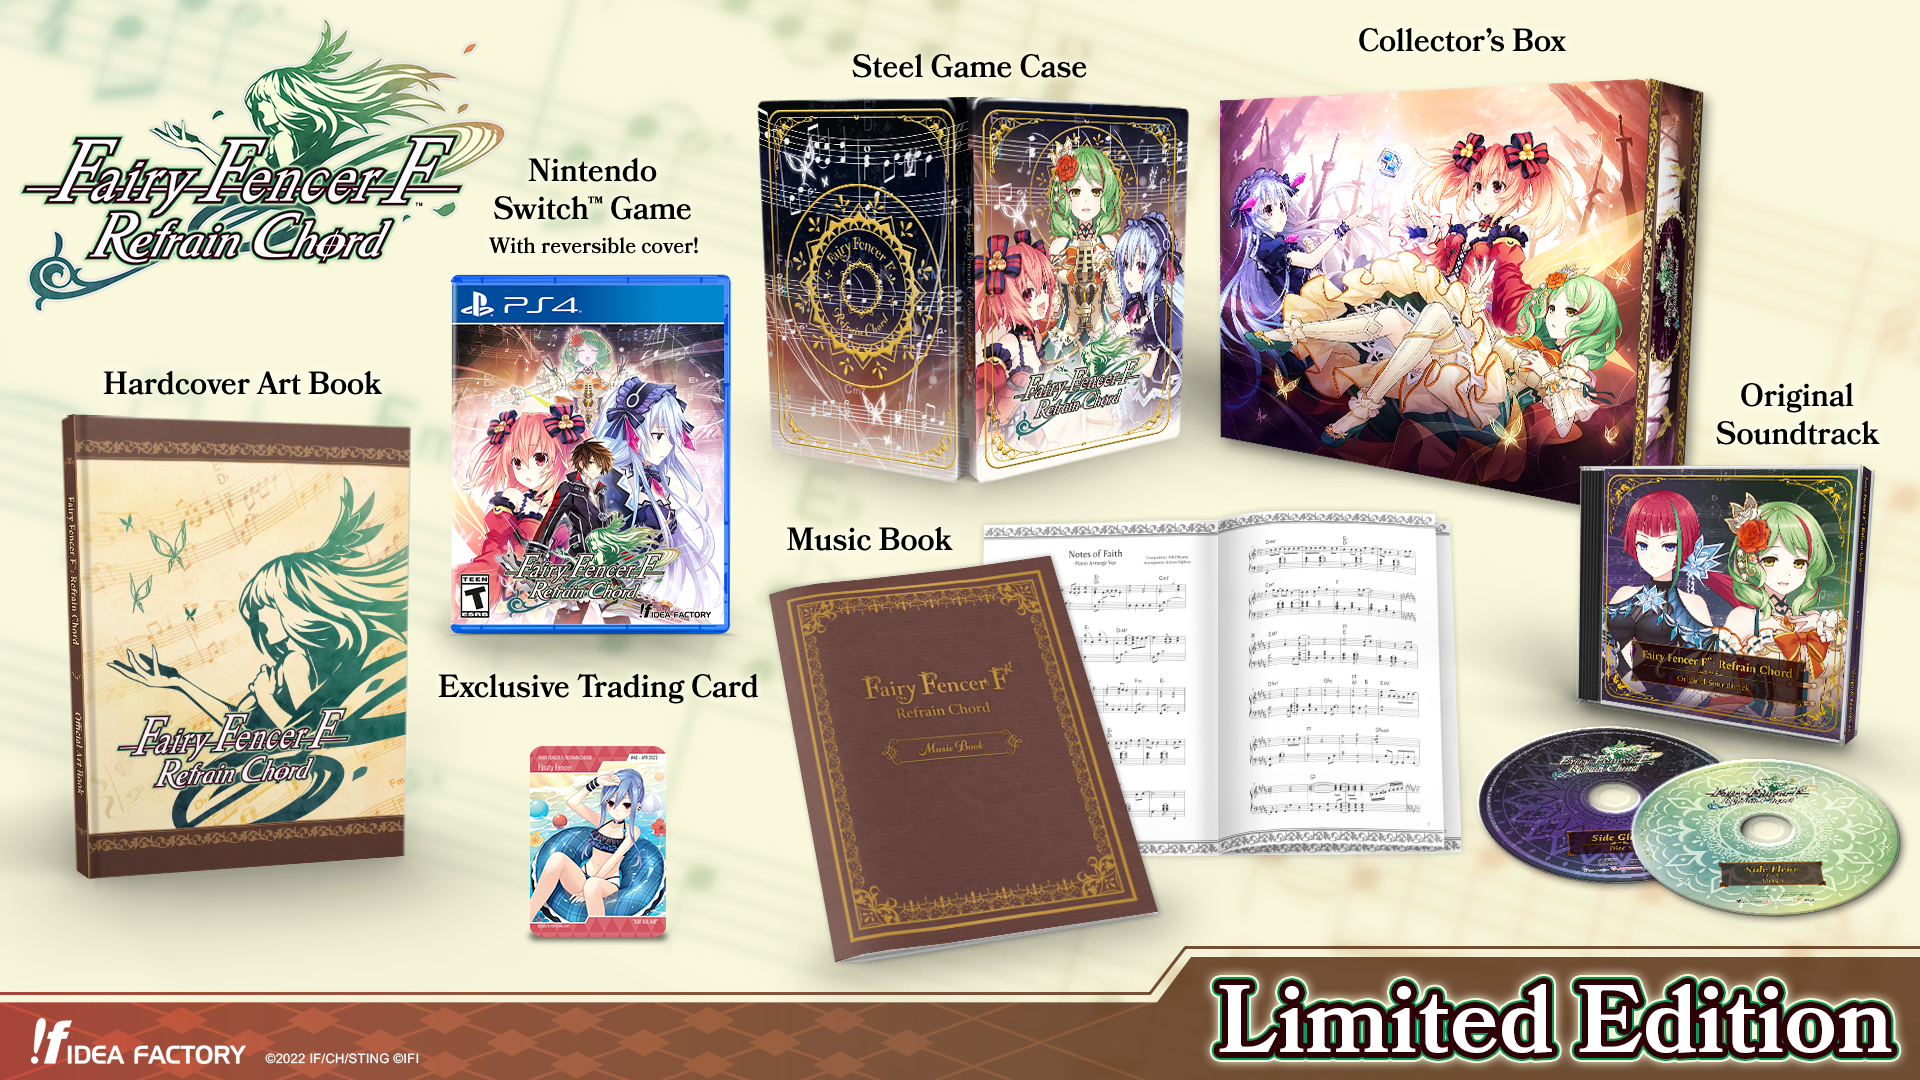 Fairy Fencer F: Refrain Chord Limited Edition (PS4/PS5/Switch)